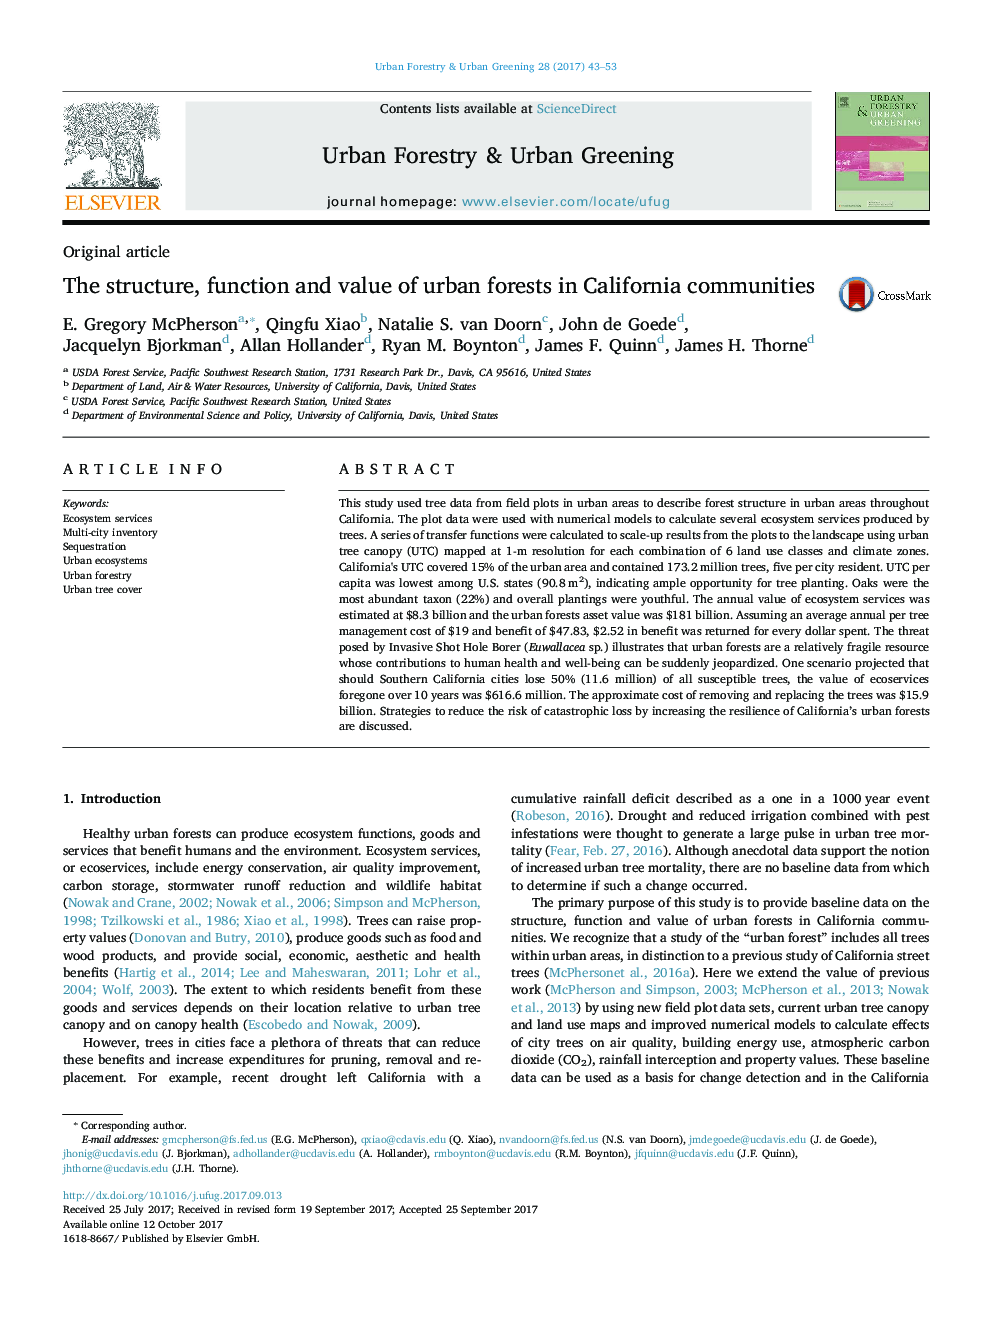 The structure, function and value of urban forests in California communities